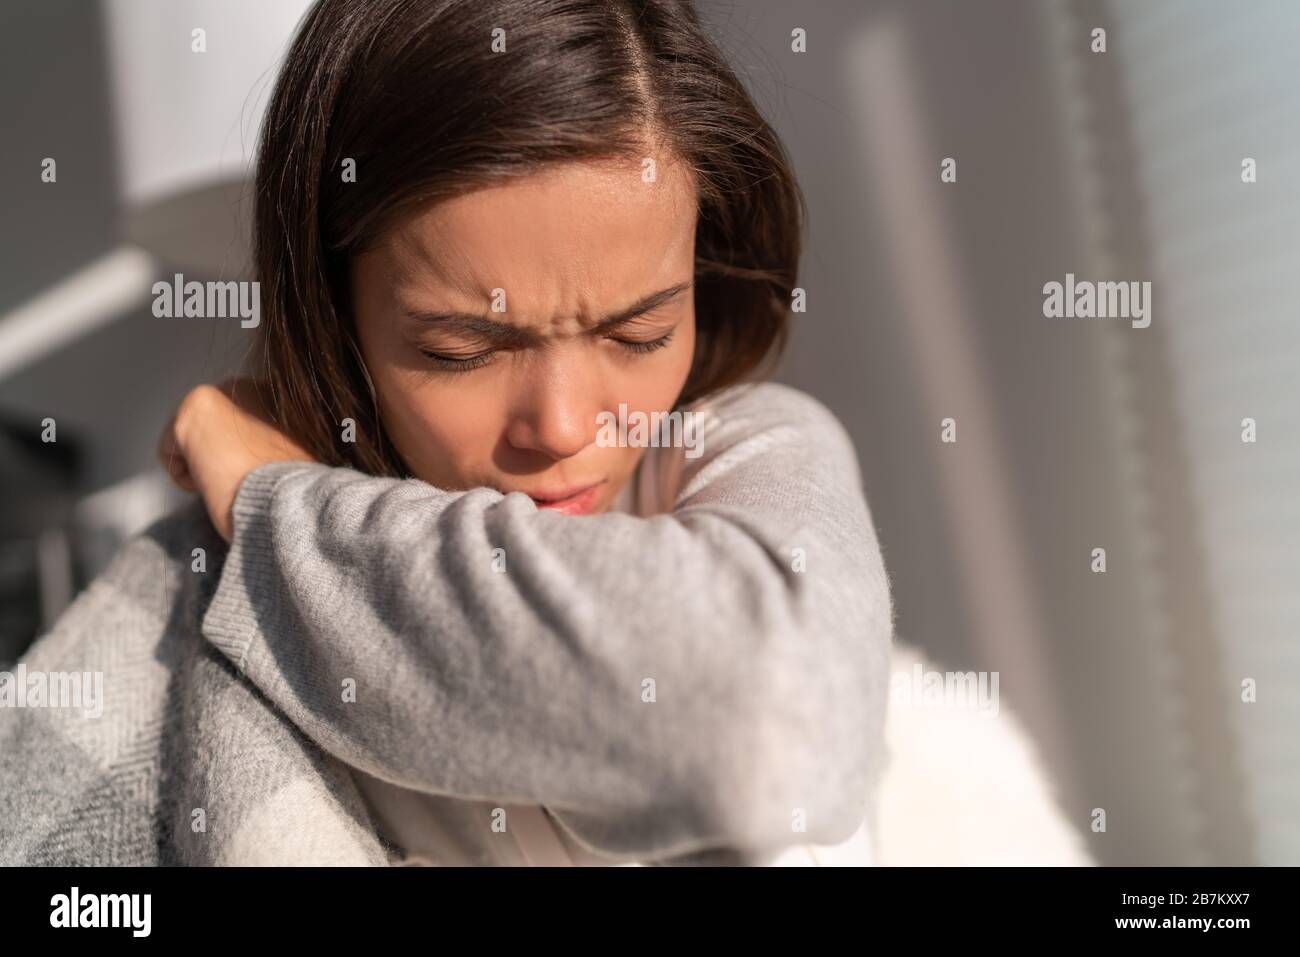 Coronavirus COVID-19 reducing of risk of spreading the infection by covering nose and mouth when coughing and sneezing with tissue or flexed elbow. Asian woman cough in arm prevention. Stock Photo